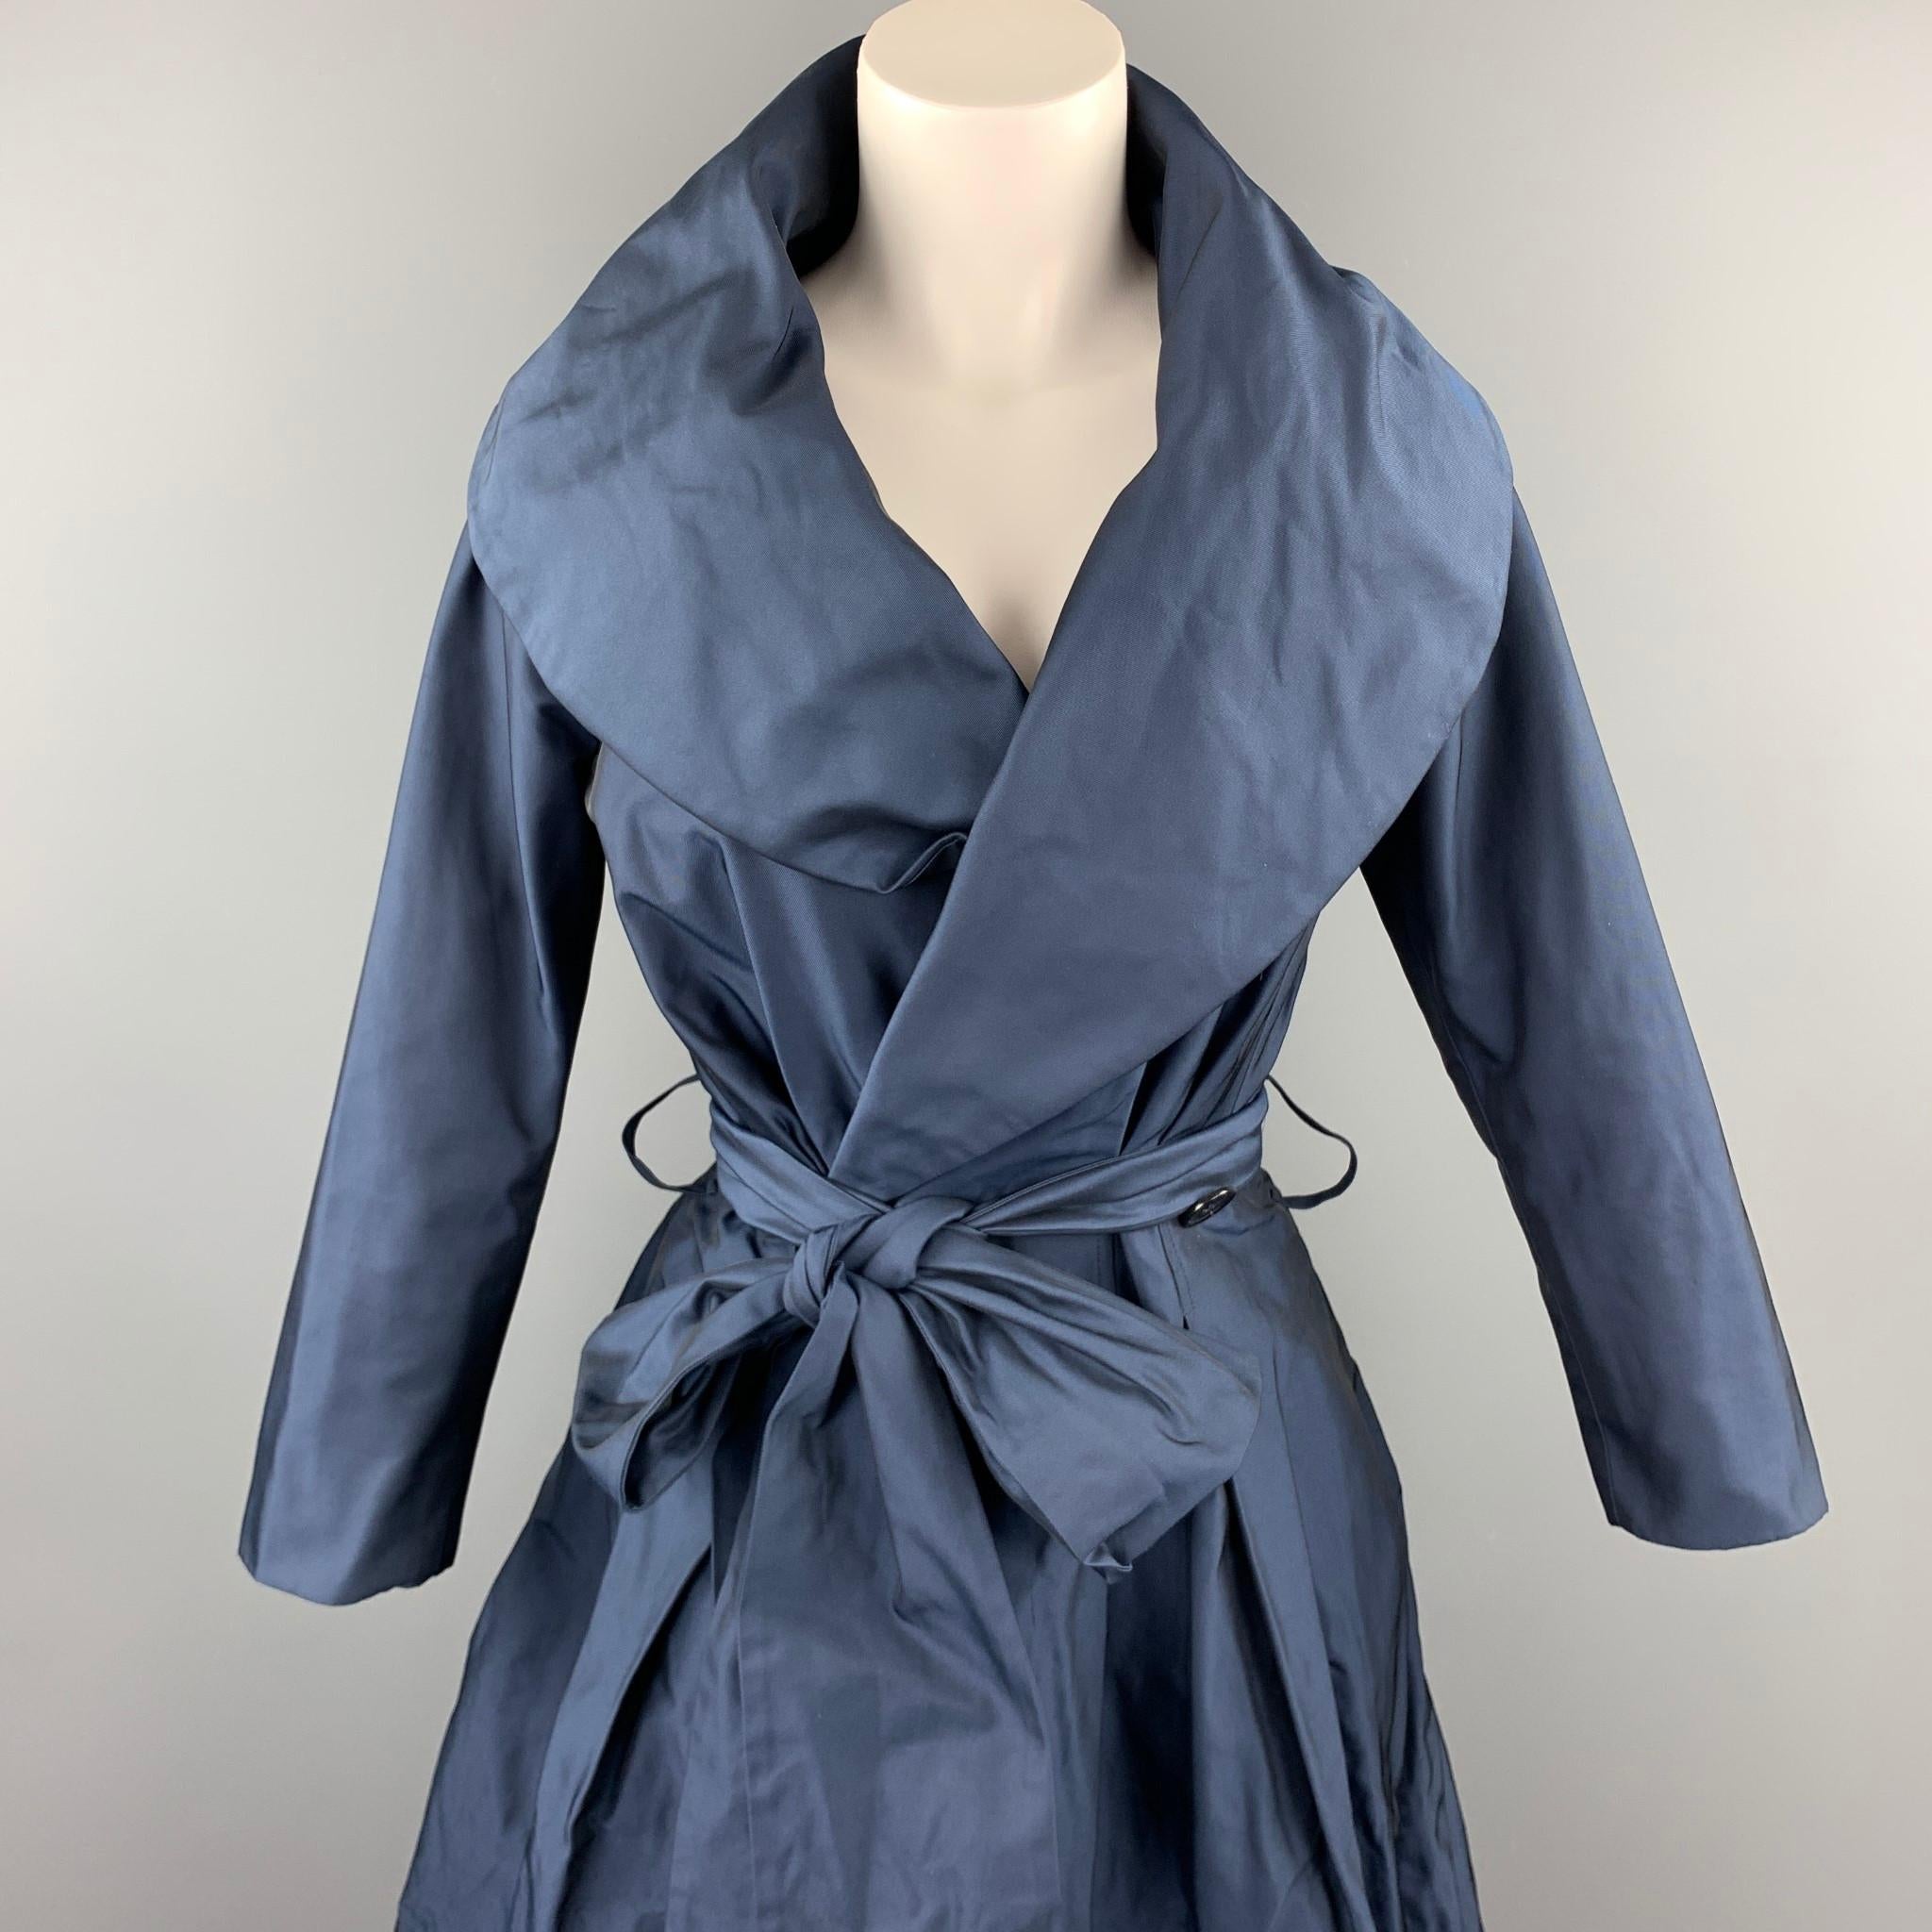 PAUW coat comes in a navy polyester featuring a shawl collar, belted, and a buttoned closure.

Good Pre-Owned Condition.
Marked: 0

Measurements:

Shoulder: 14.5 in. 
Bust: 34 in. 
Sleeve: 20 in. 
Length: 39 in.